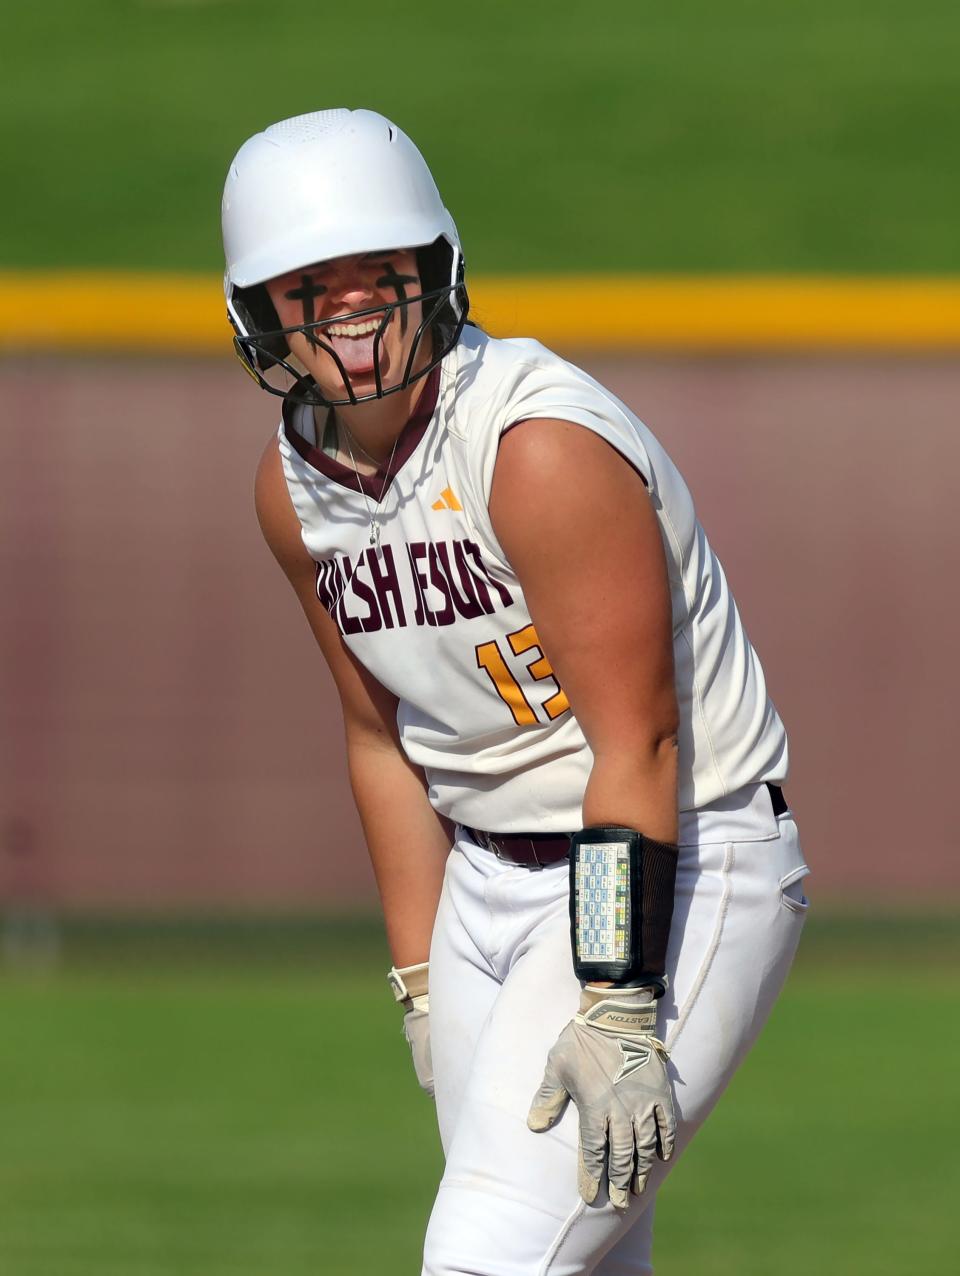 McKayla McGee leads Walsh Jesuit in home runs (6) and RBIs (33) this season.